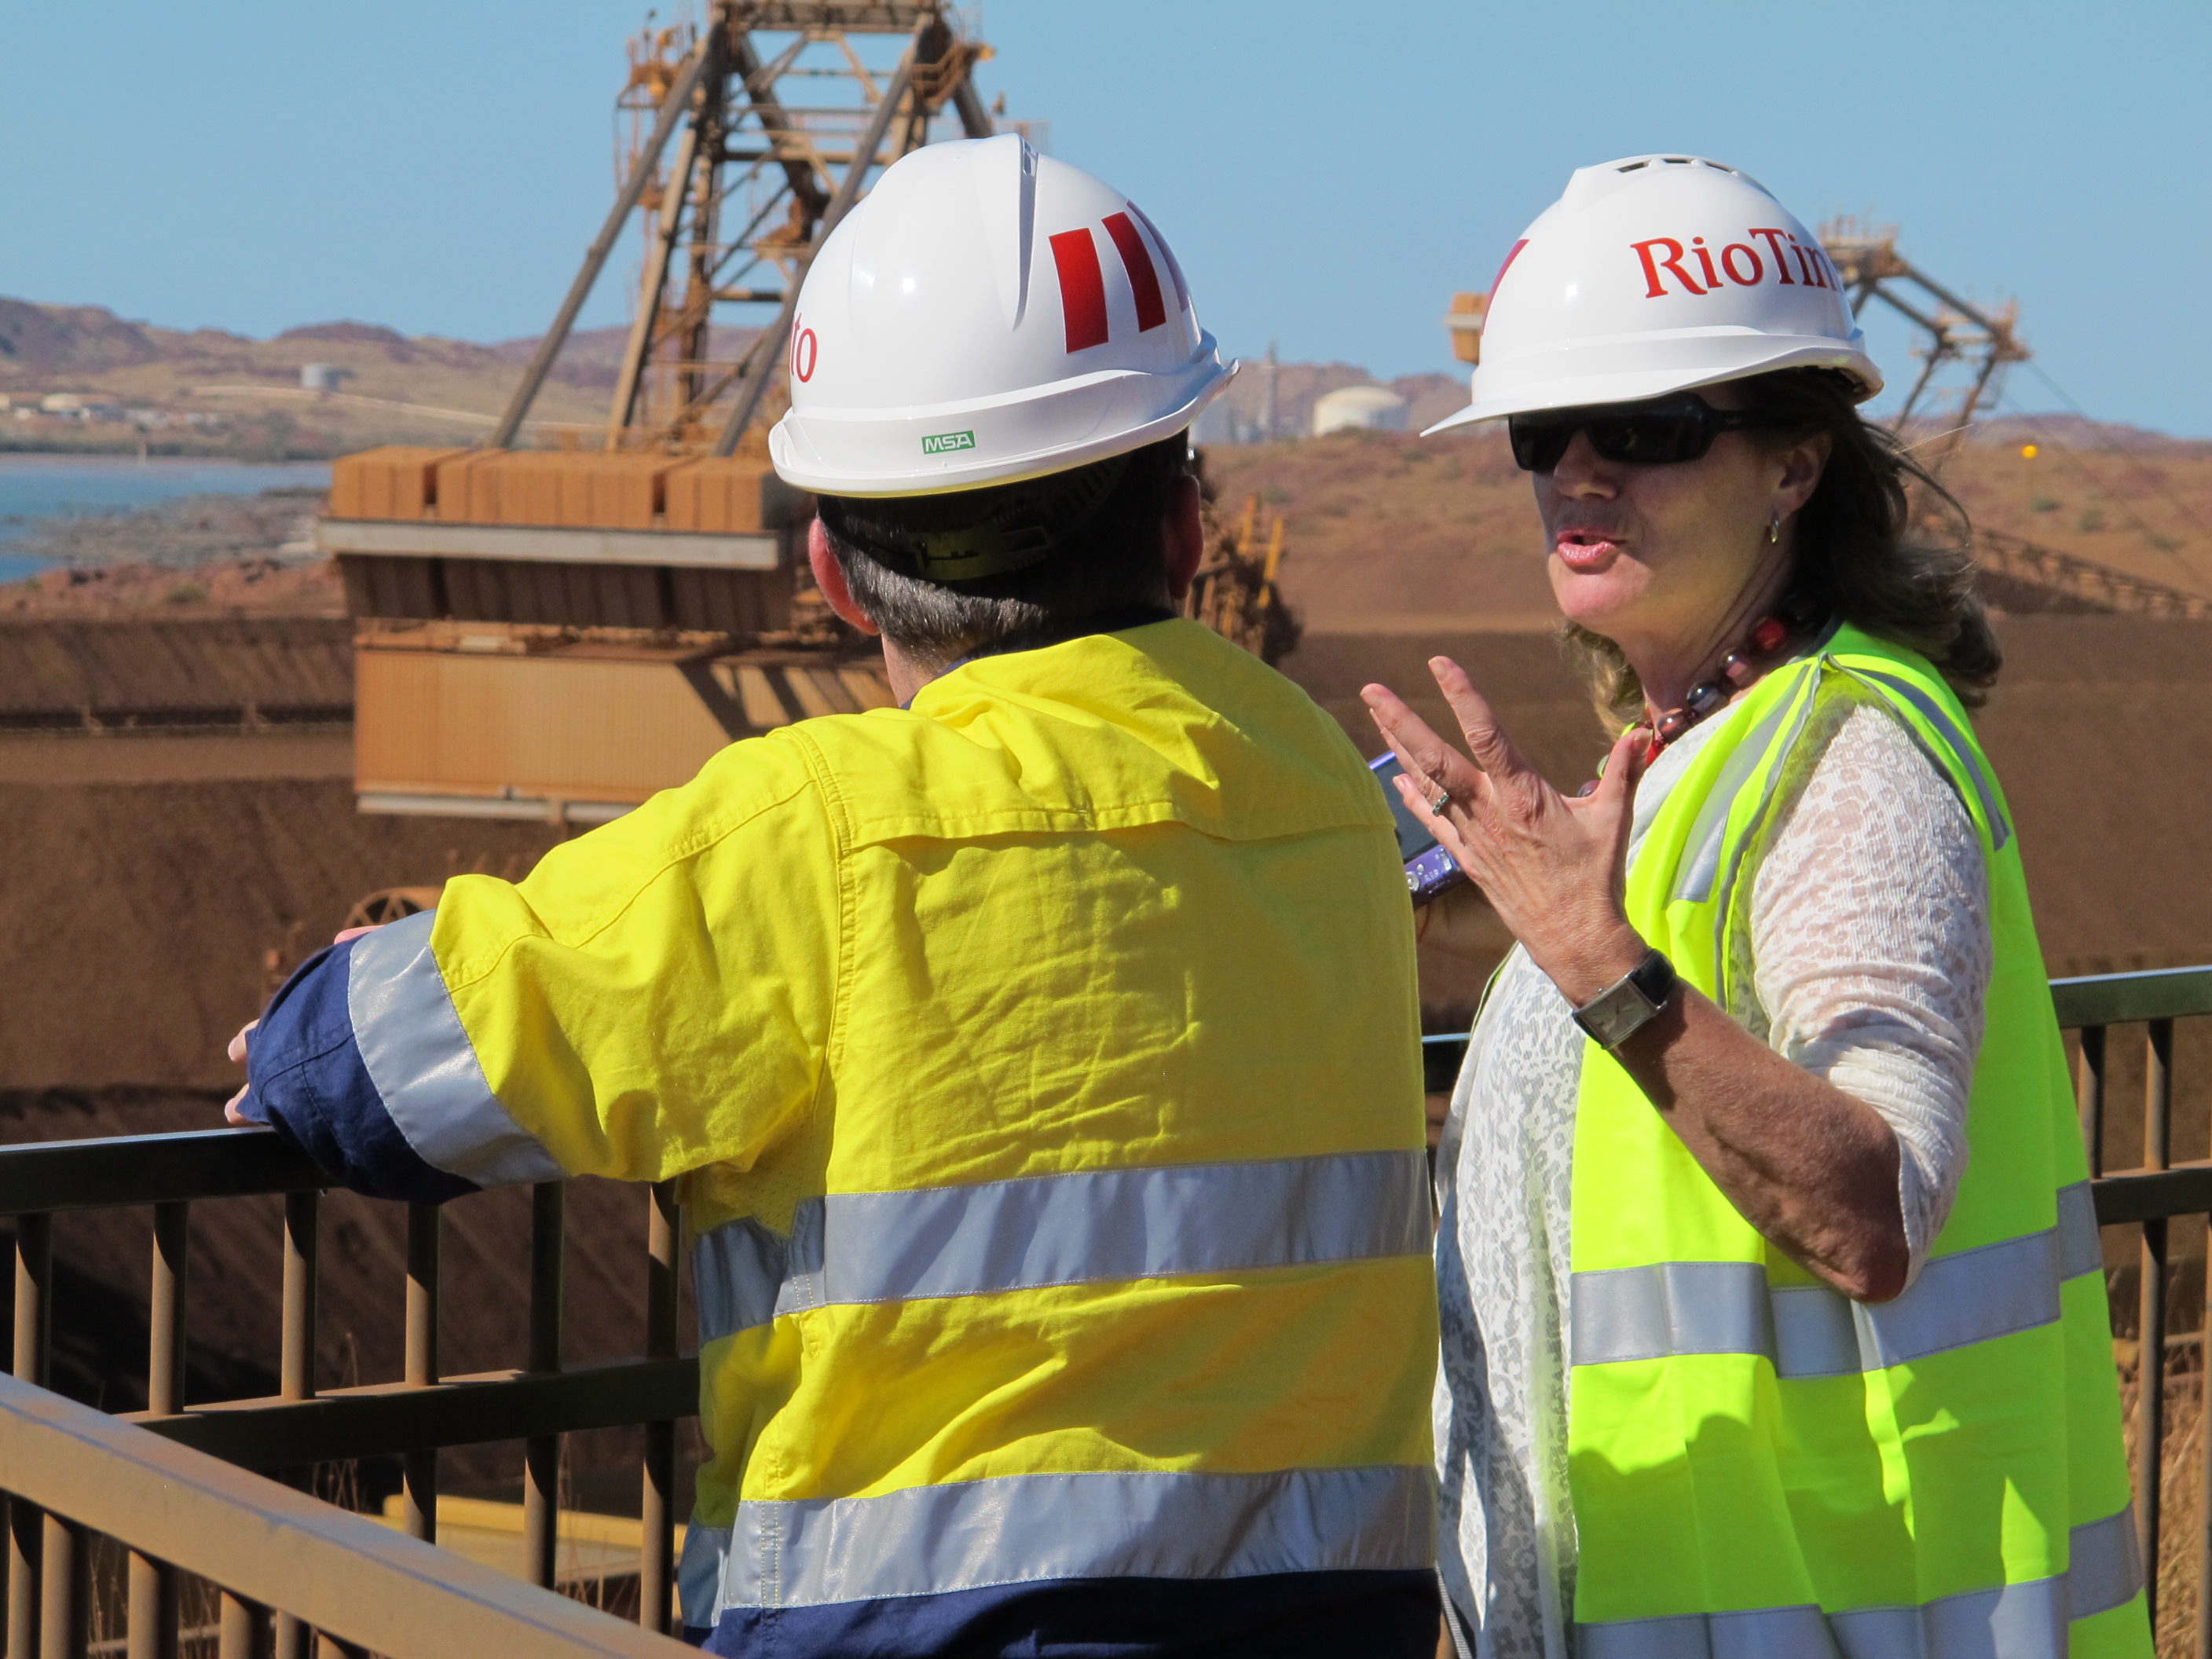 Committee member Senator Helen Kroger speaking with a Rio Tinto employee about the operations of its iron ore export site at Dampier Port, 23 April 2013.